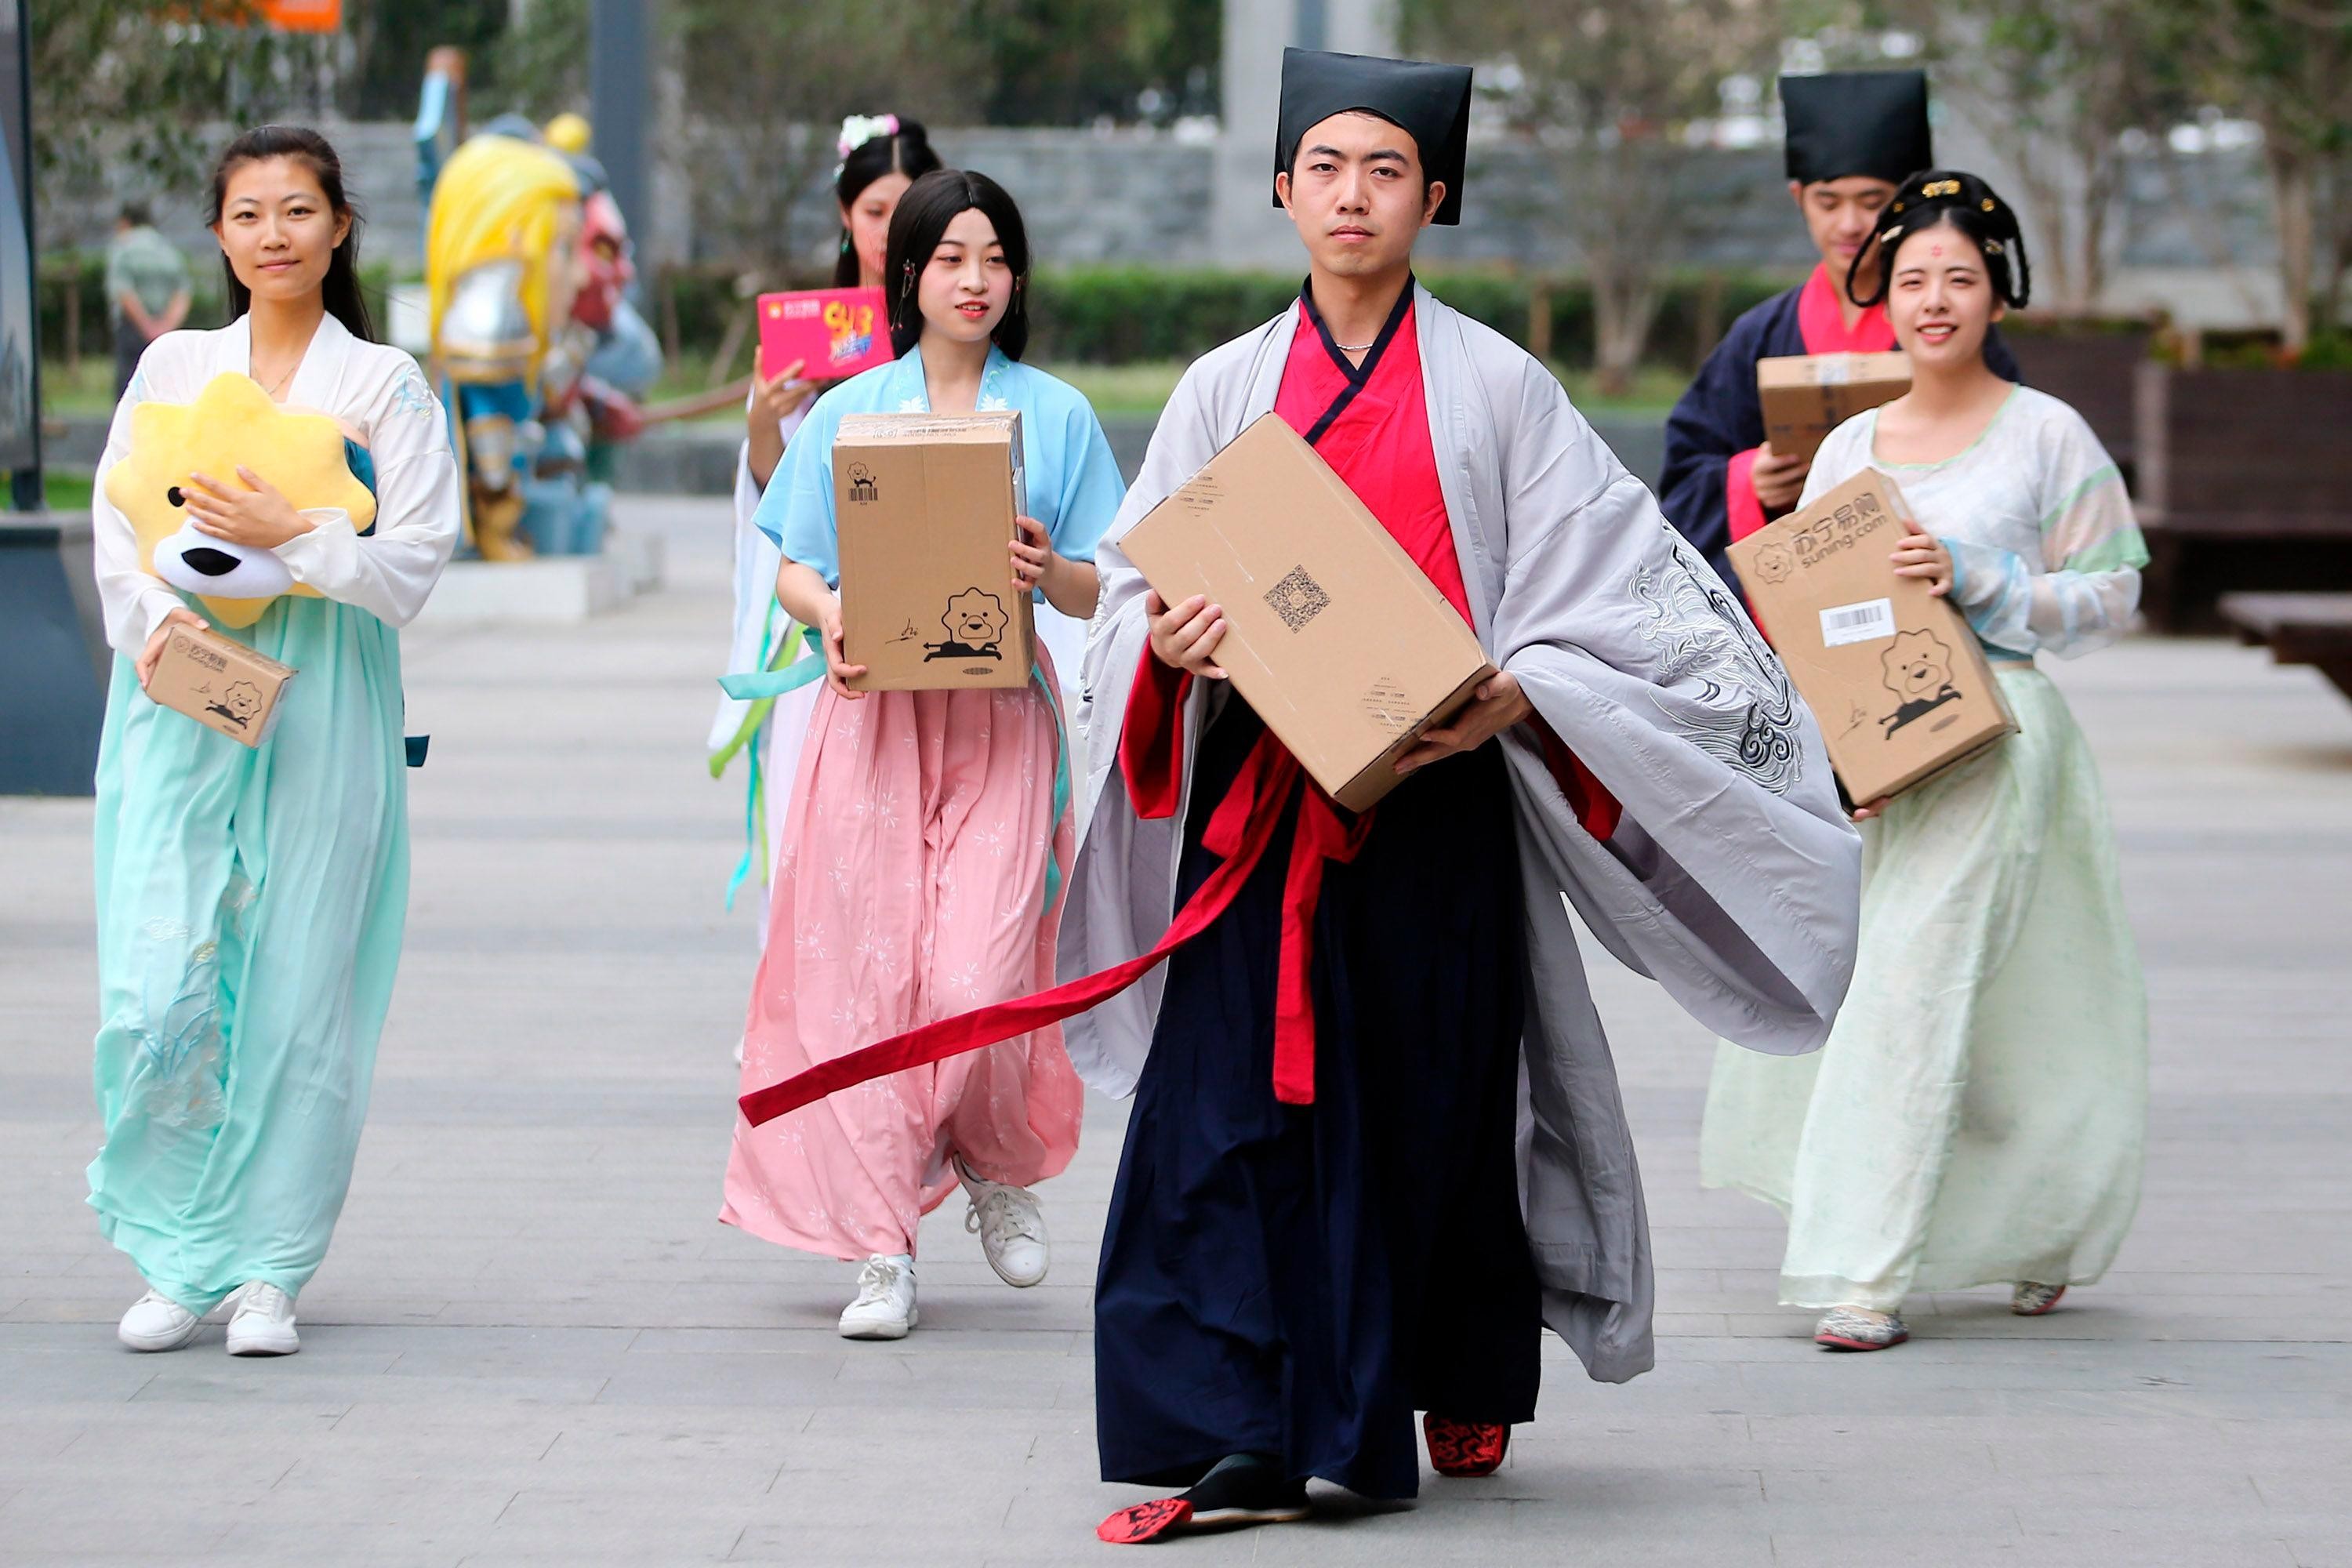 zuiverheid Accumulatie Maak een sneeuwpop Is ancient Chinese clothing fad more cosplay than nod to cultural heritage  | South China Morning Post